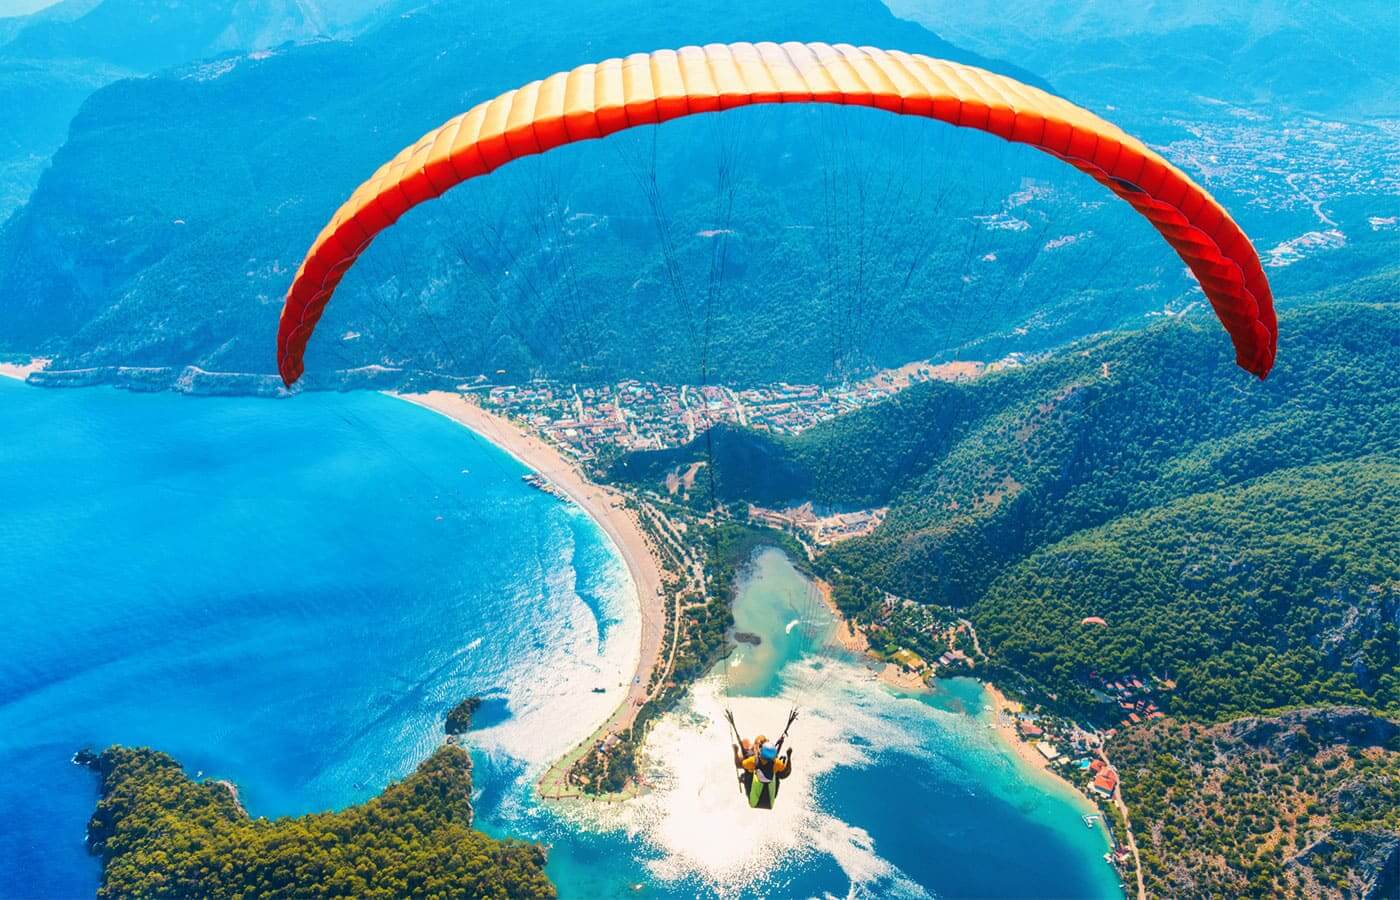 A paraglider flying above a coastal city on a clear sunny day